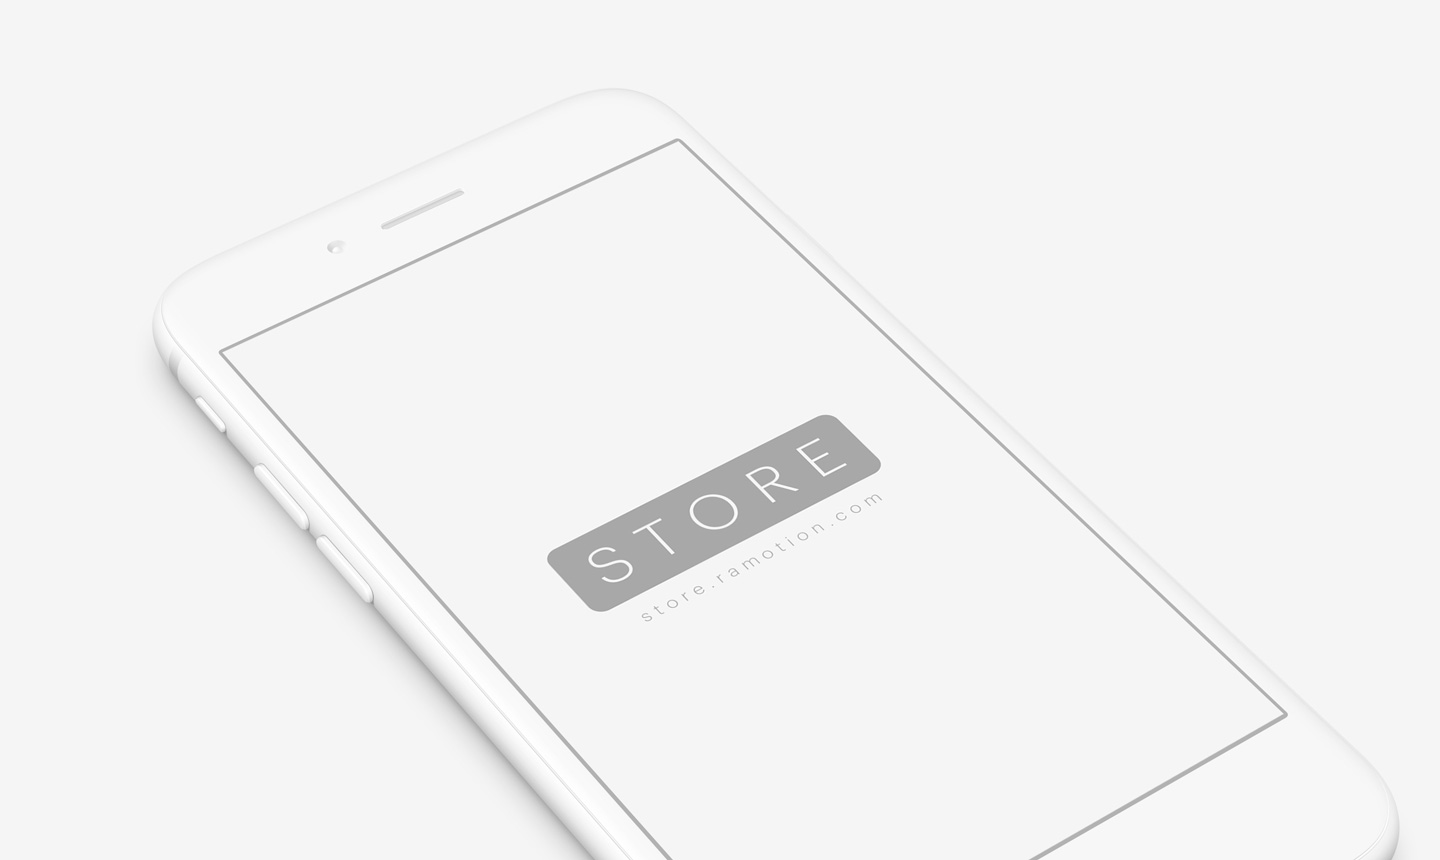 Dribbble - 3-iphone-clay-white-perspective-psd.jpg by Ramotion